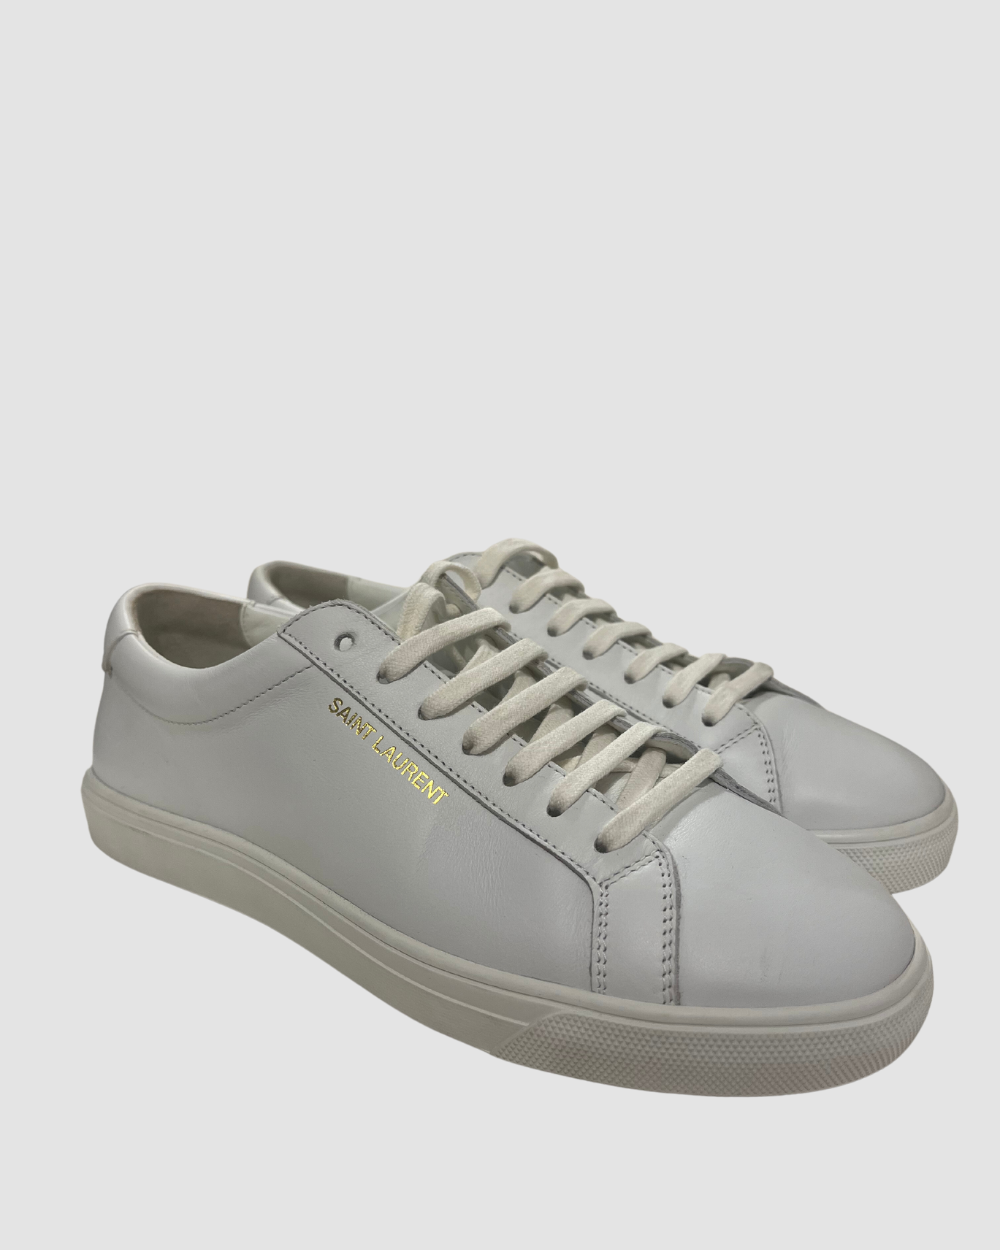 Saint Laurent White Leather Low Top Sneakers